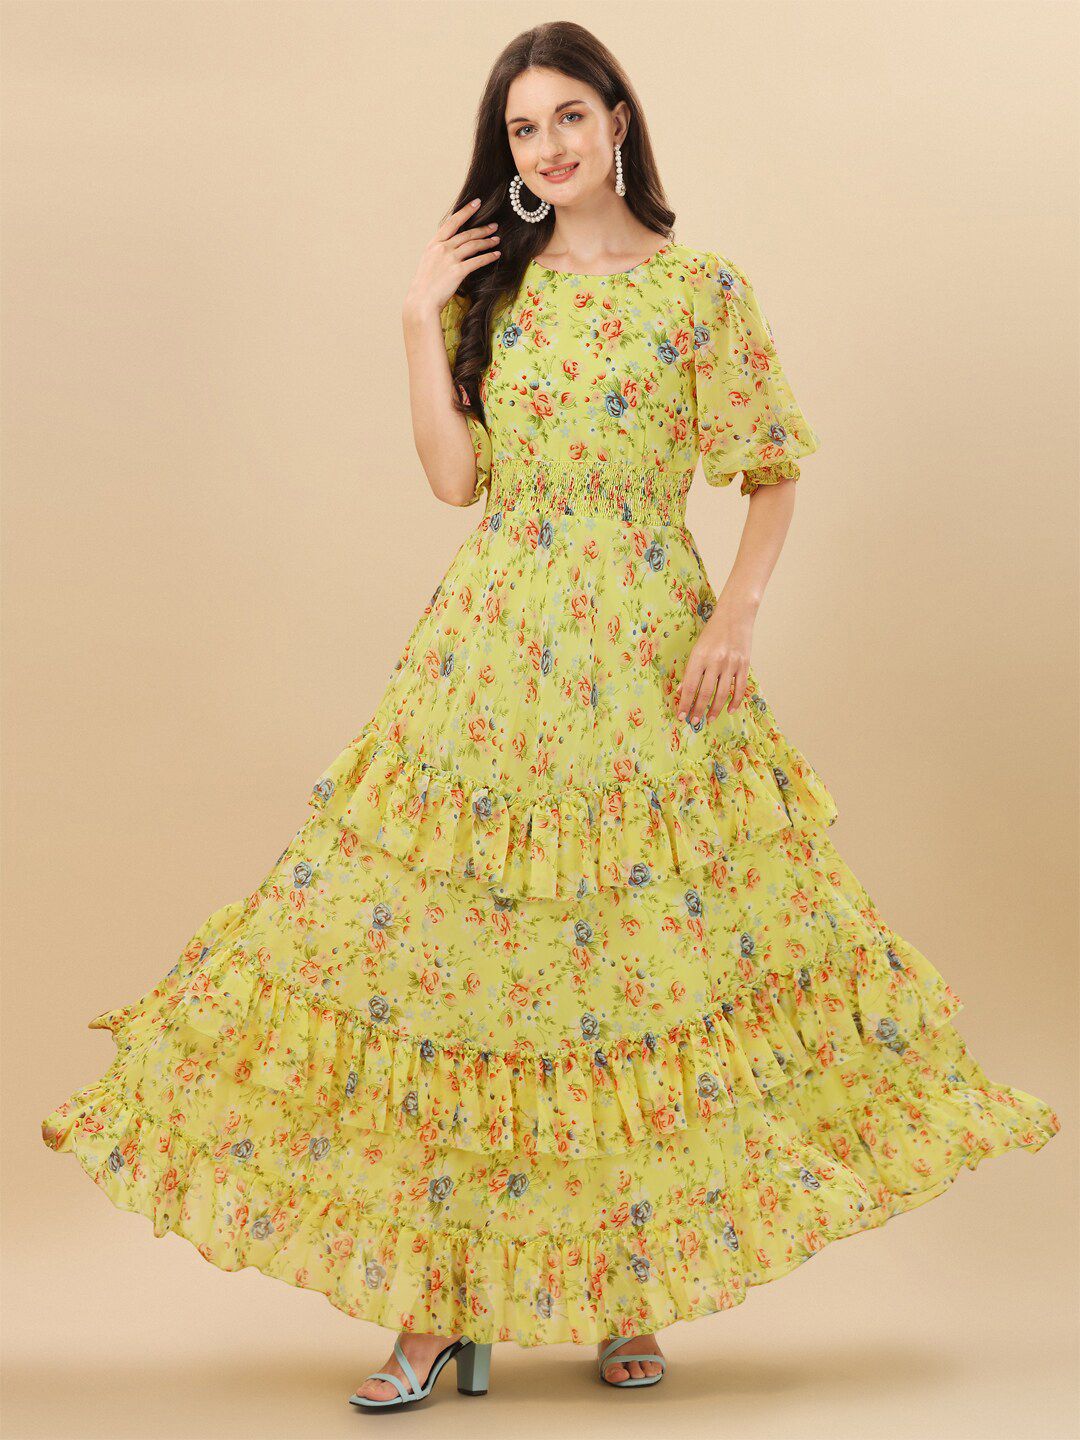 Vidraa Western Store Yellow Floral Georgette Maxi Dress Price in India